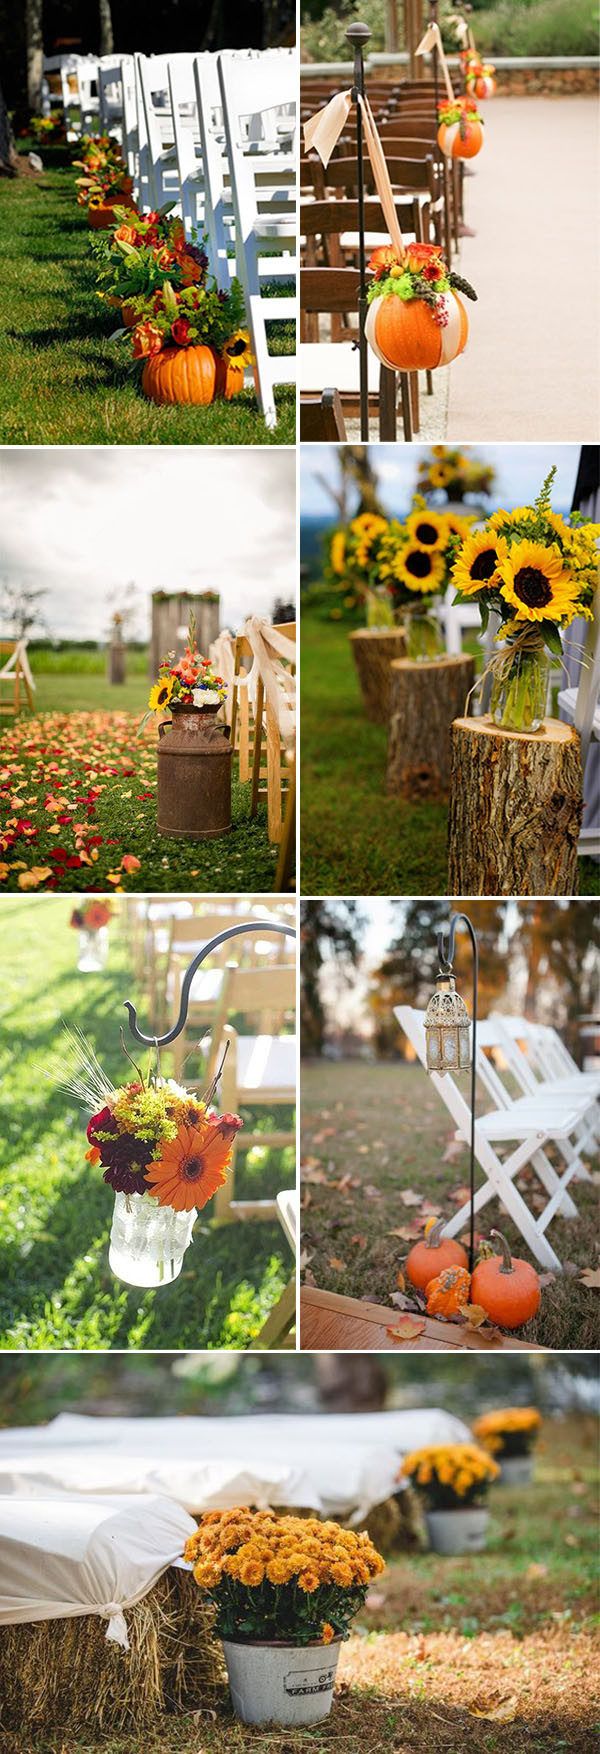 Autumn Weddings Ideas
 Fall In Love With These 50 Great Fall Wedding Ideas